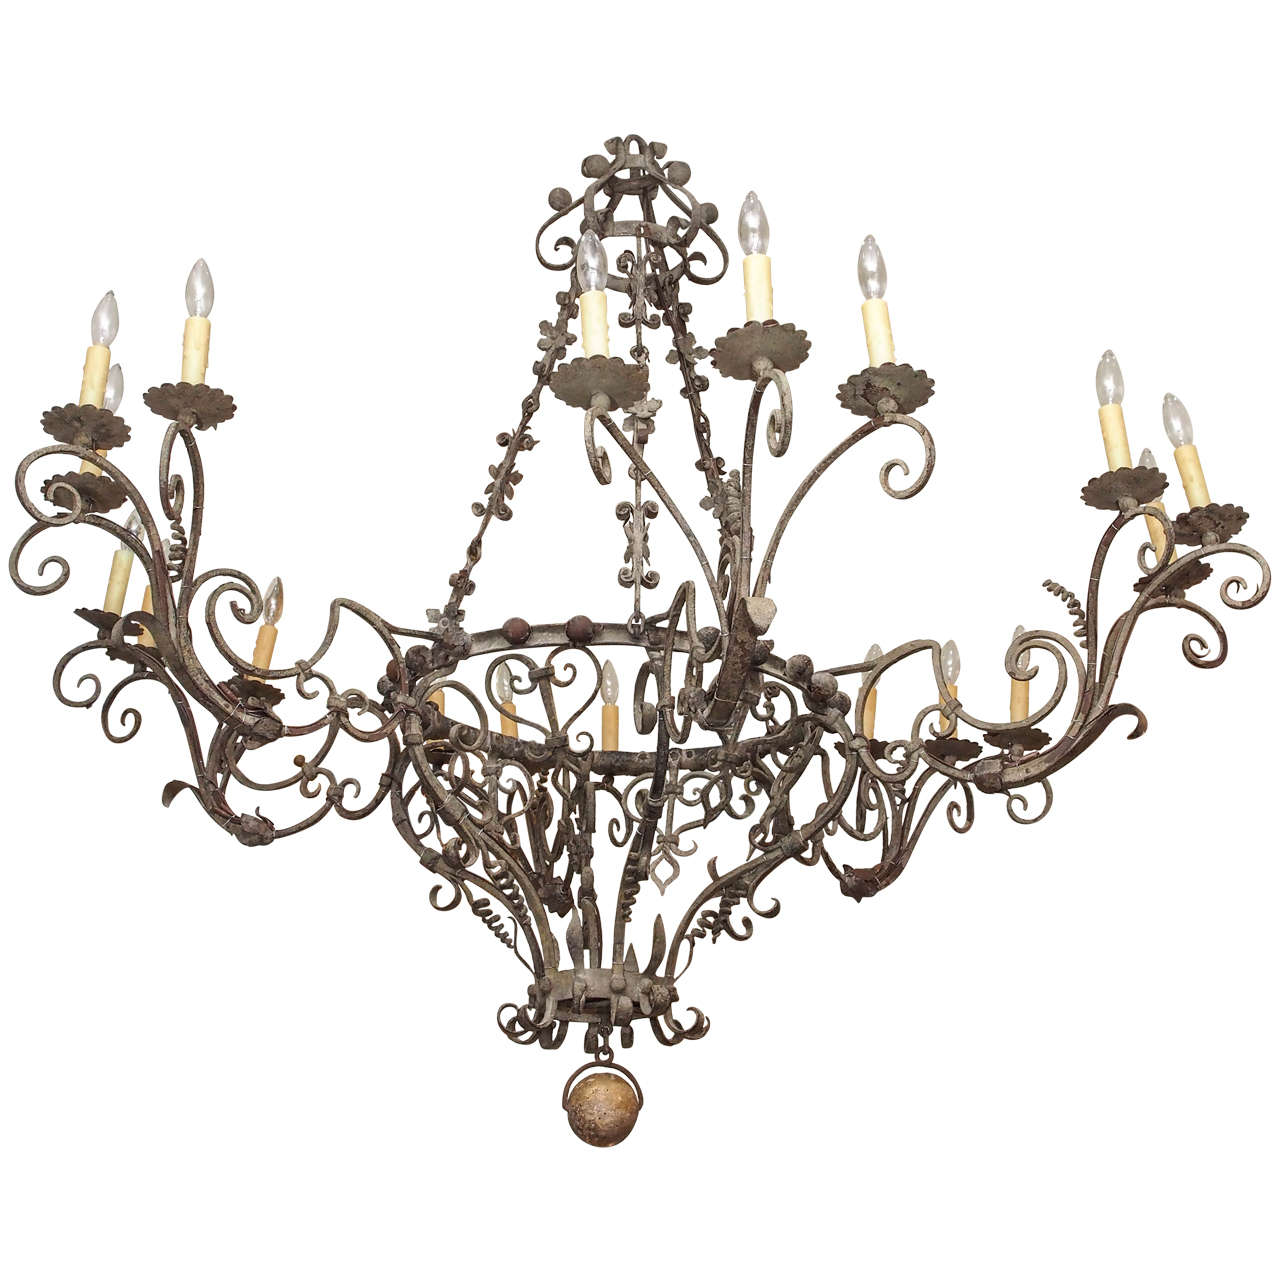 Exceptional Tuscan, Hand-Wrought Iron Chandelier with Eighteen Lights